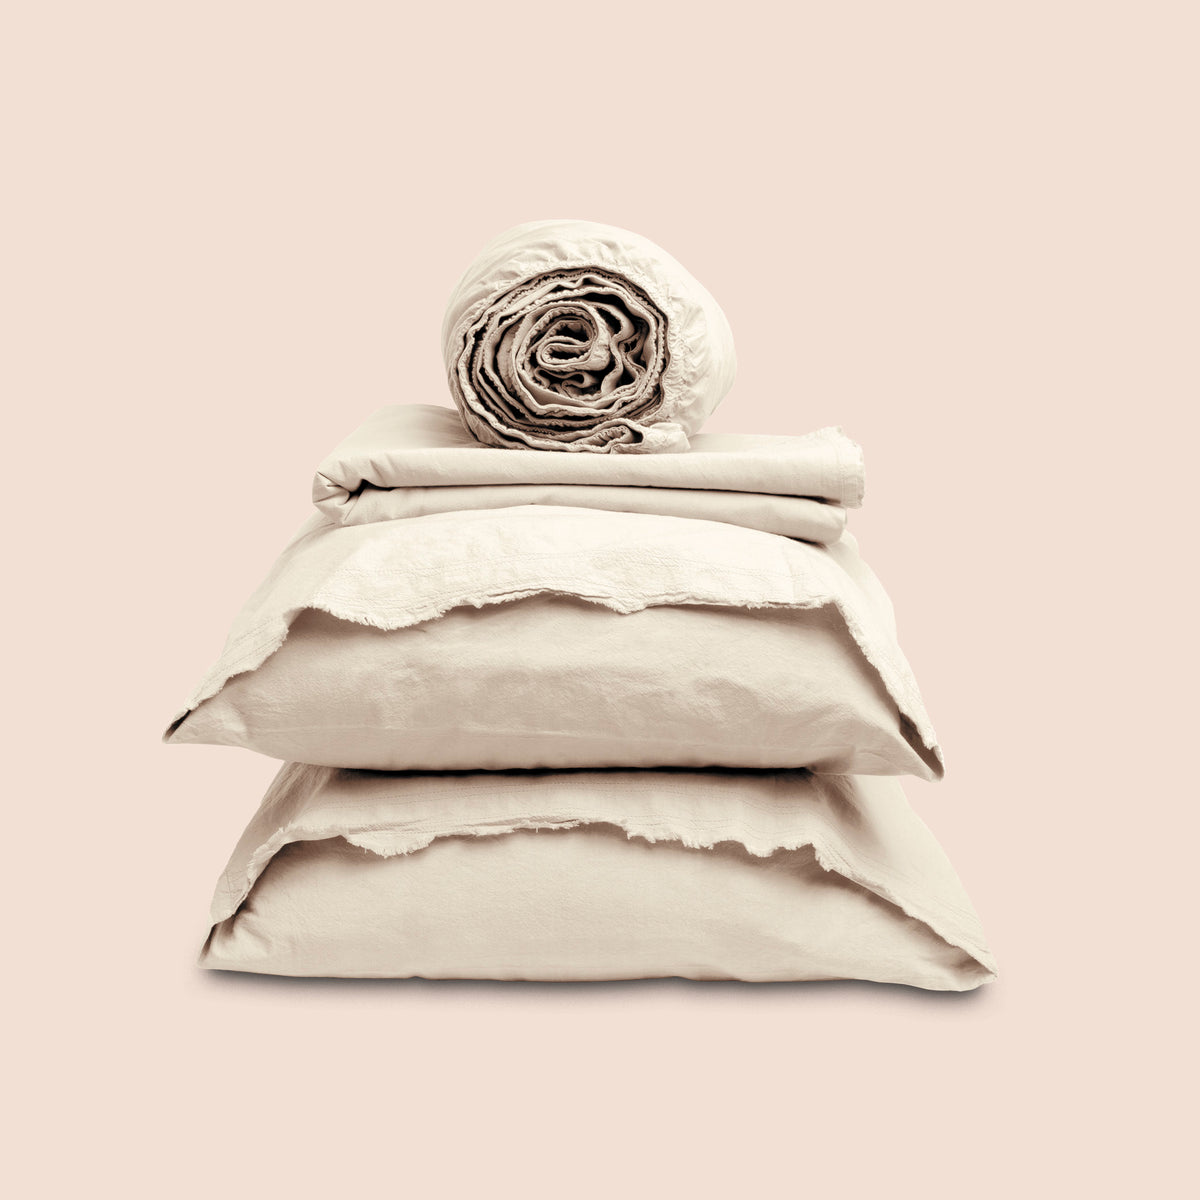 Image showcasing entire Ecru Garment Washed Percale Sheet Set on a light pink background. Set features a rolled-up fitted sheet on top, a neatly folded flat sheet, and two stacked pillowcases with raw-edged detailing facing front. 